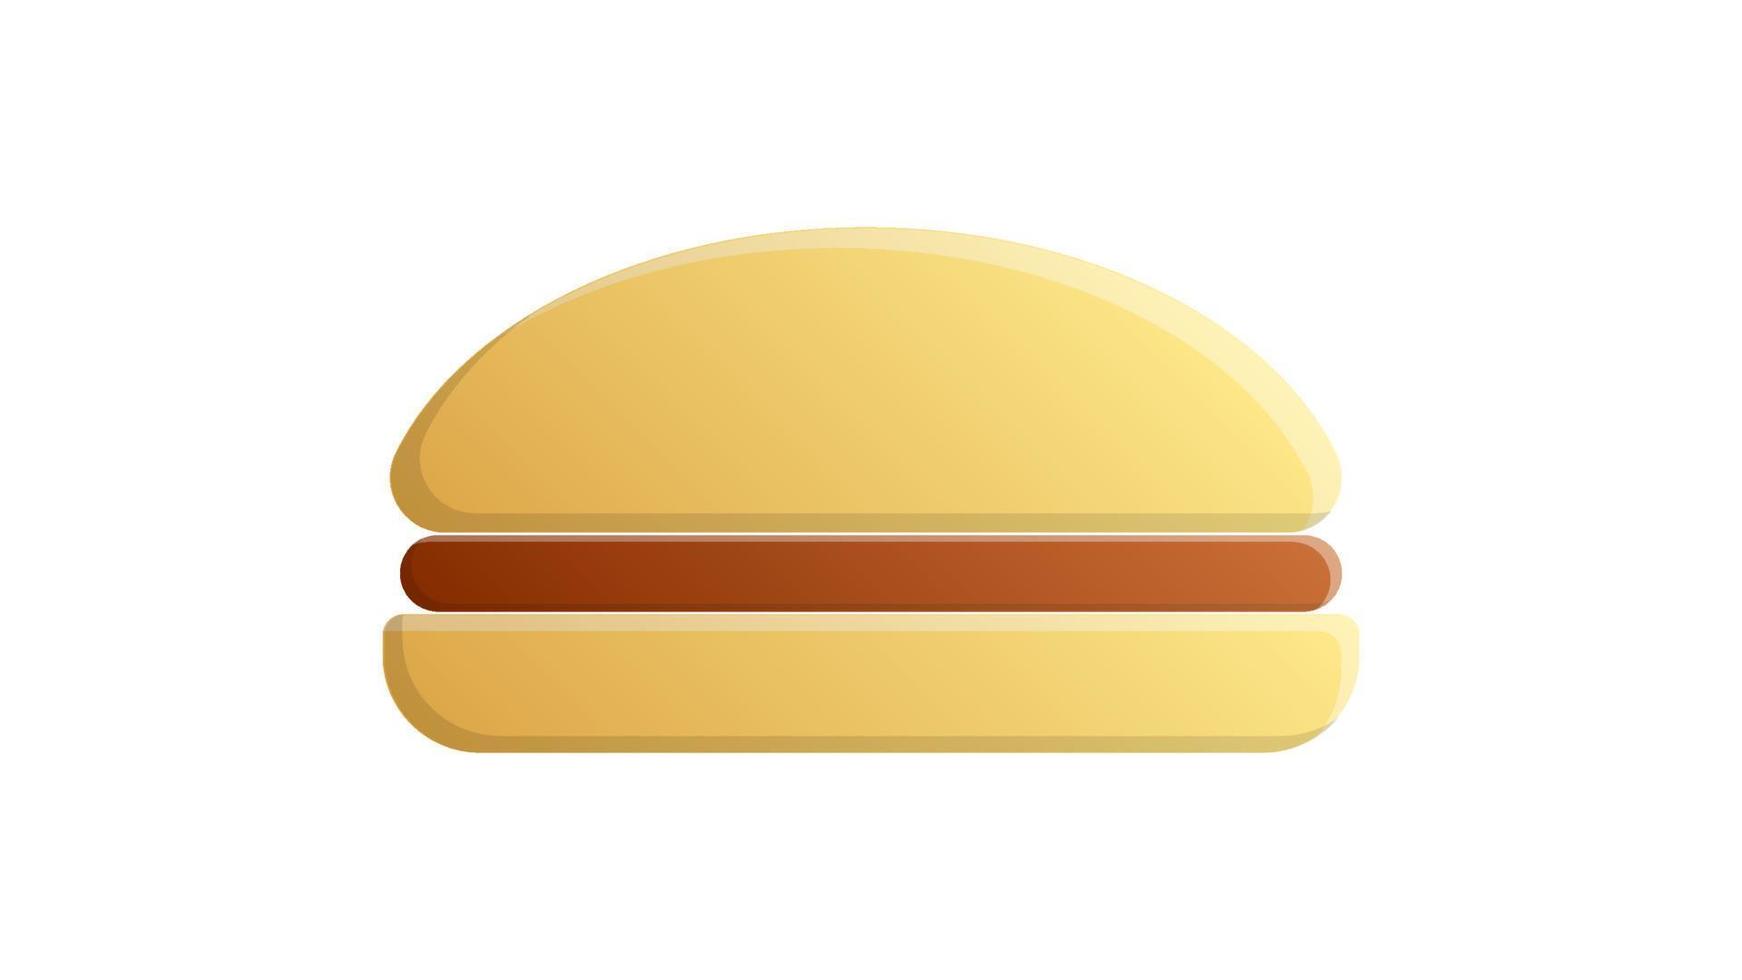 Cheeseburger. Hand drawn vector illustration in cartoon style. Isolated on white background. Design for banner, poster, card, print, menu